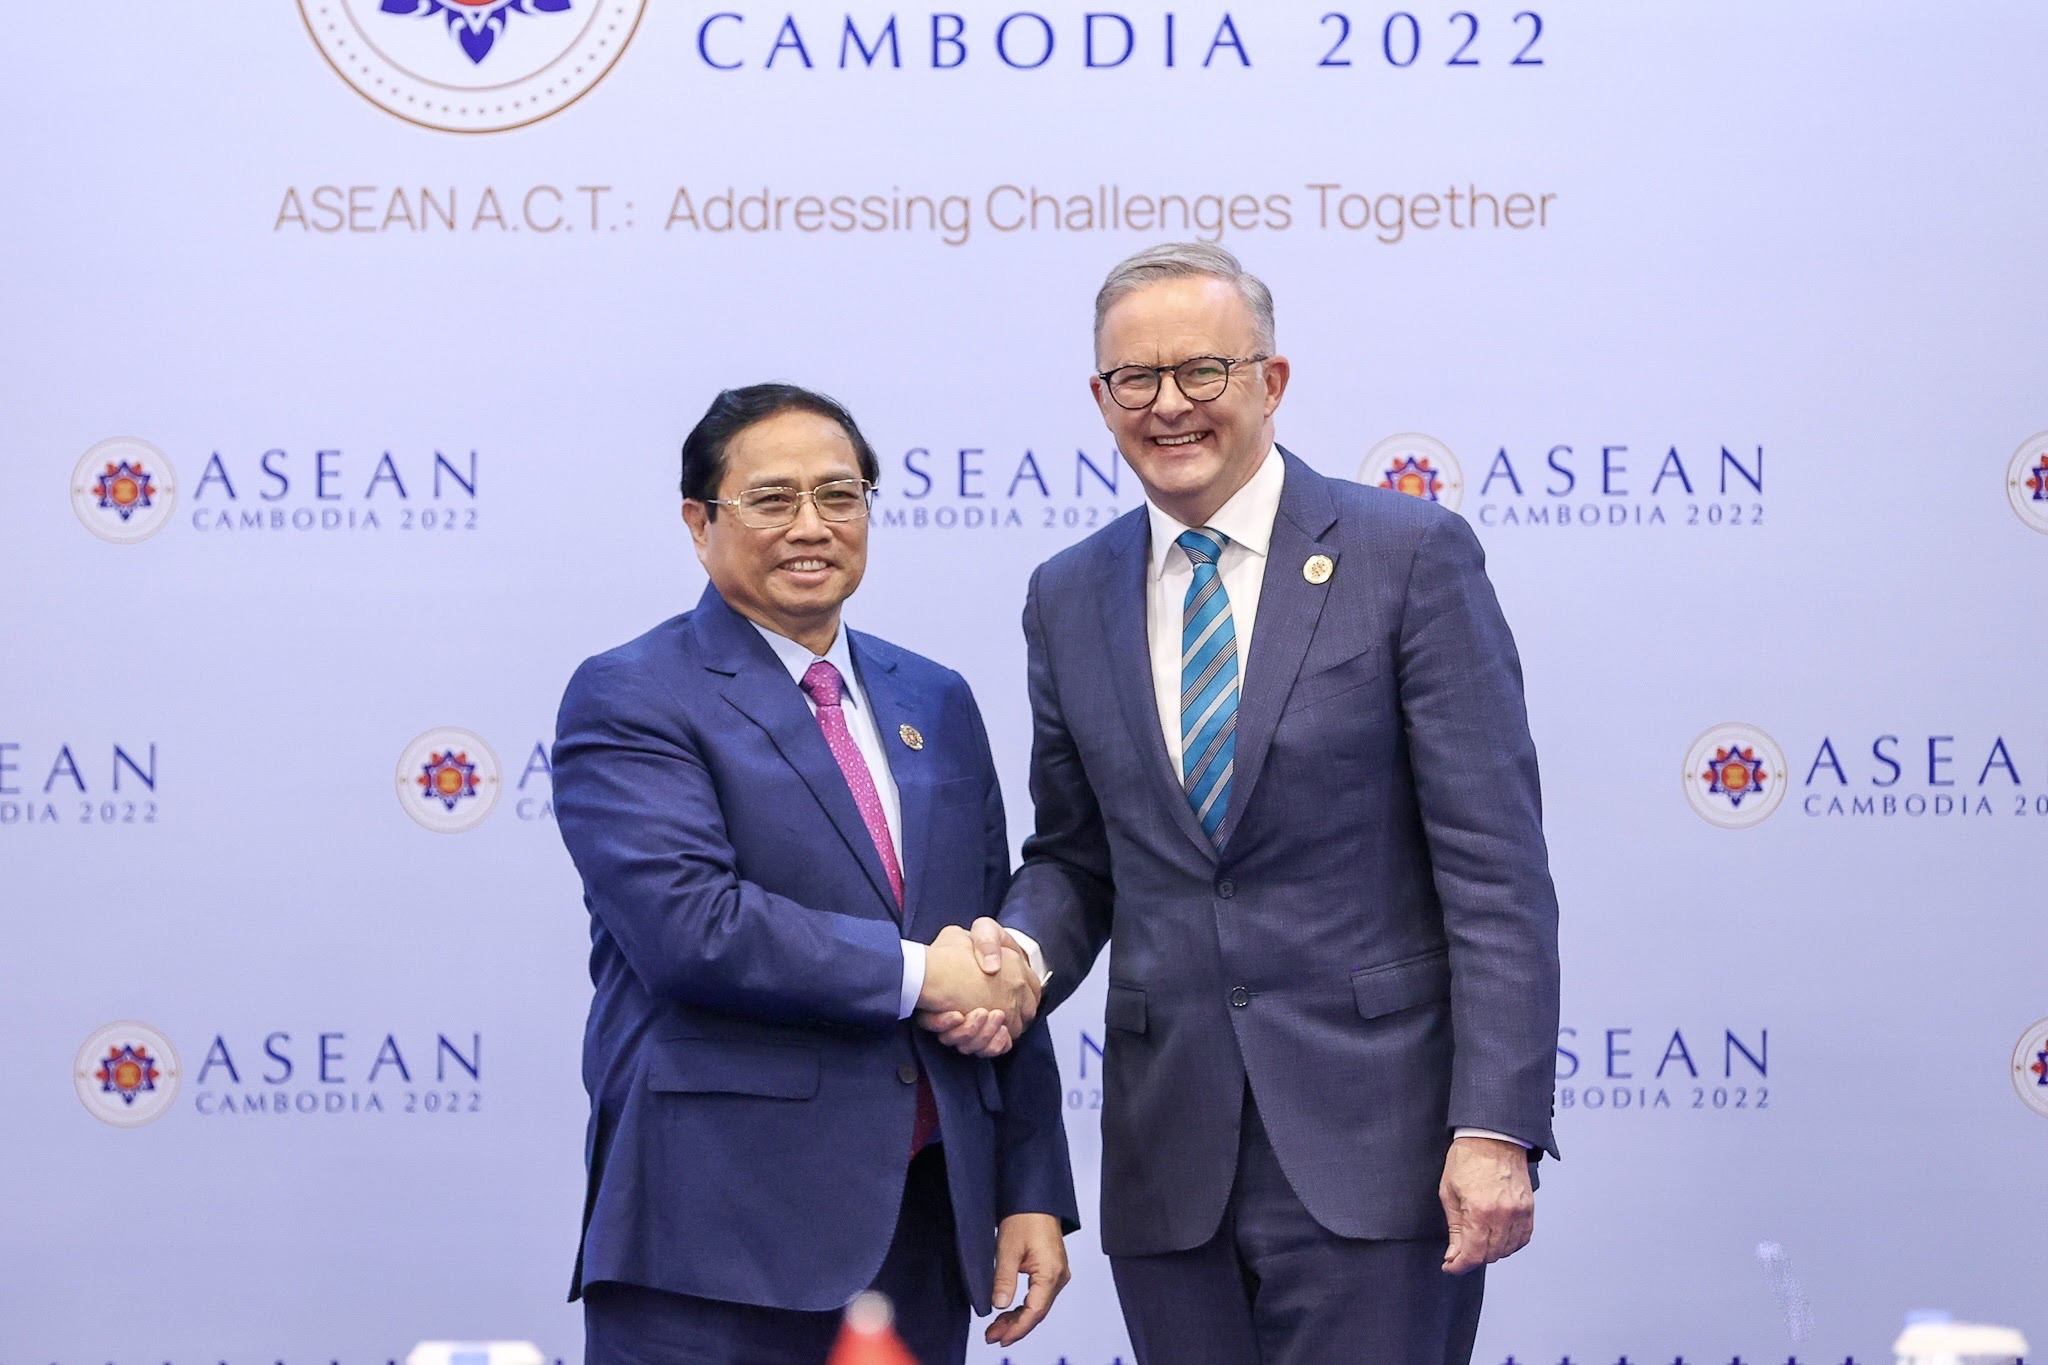 Vietnamese Prime Minister Pham Minh Chinh shakes hands with Australian Prime Minister Anthony Albanese in Phnom Penh, November 12, 2022. Photo: D.Bac / Tuoi Tre